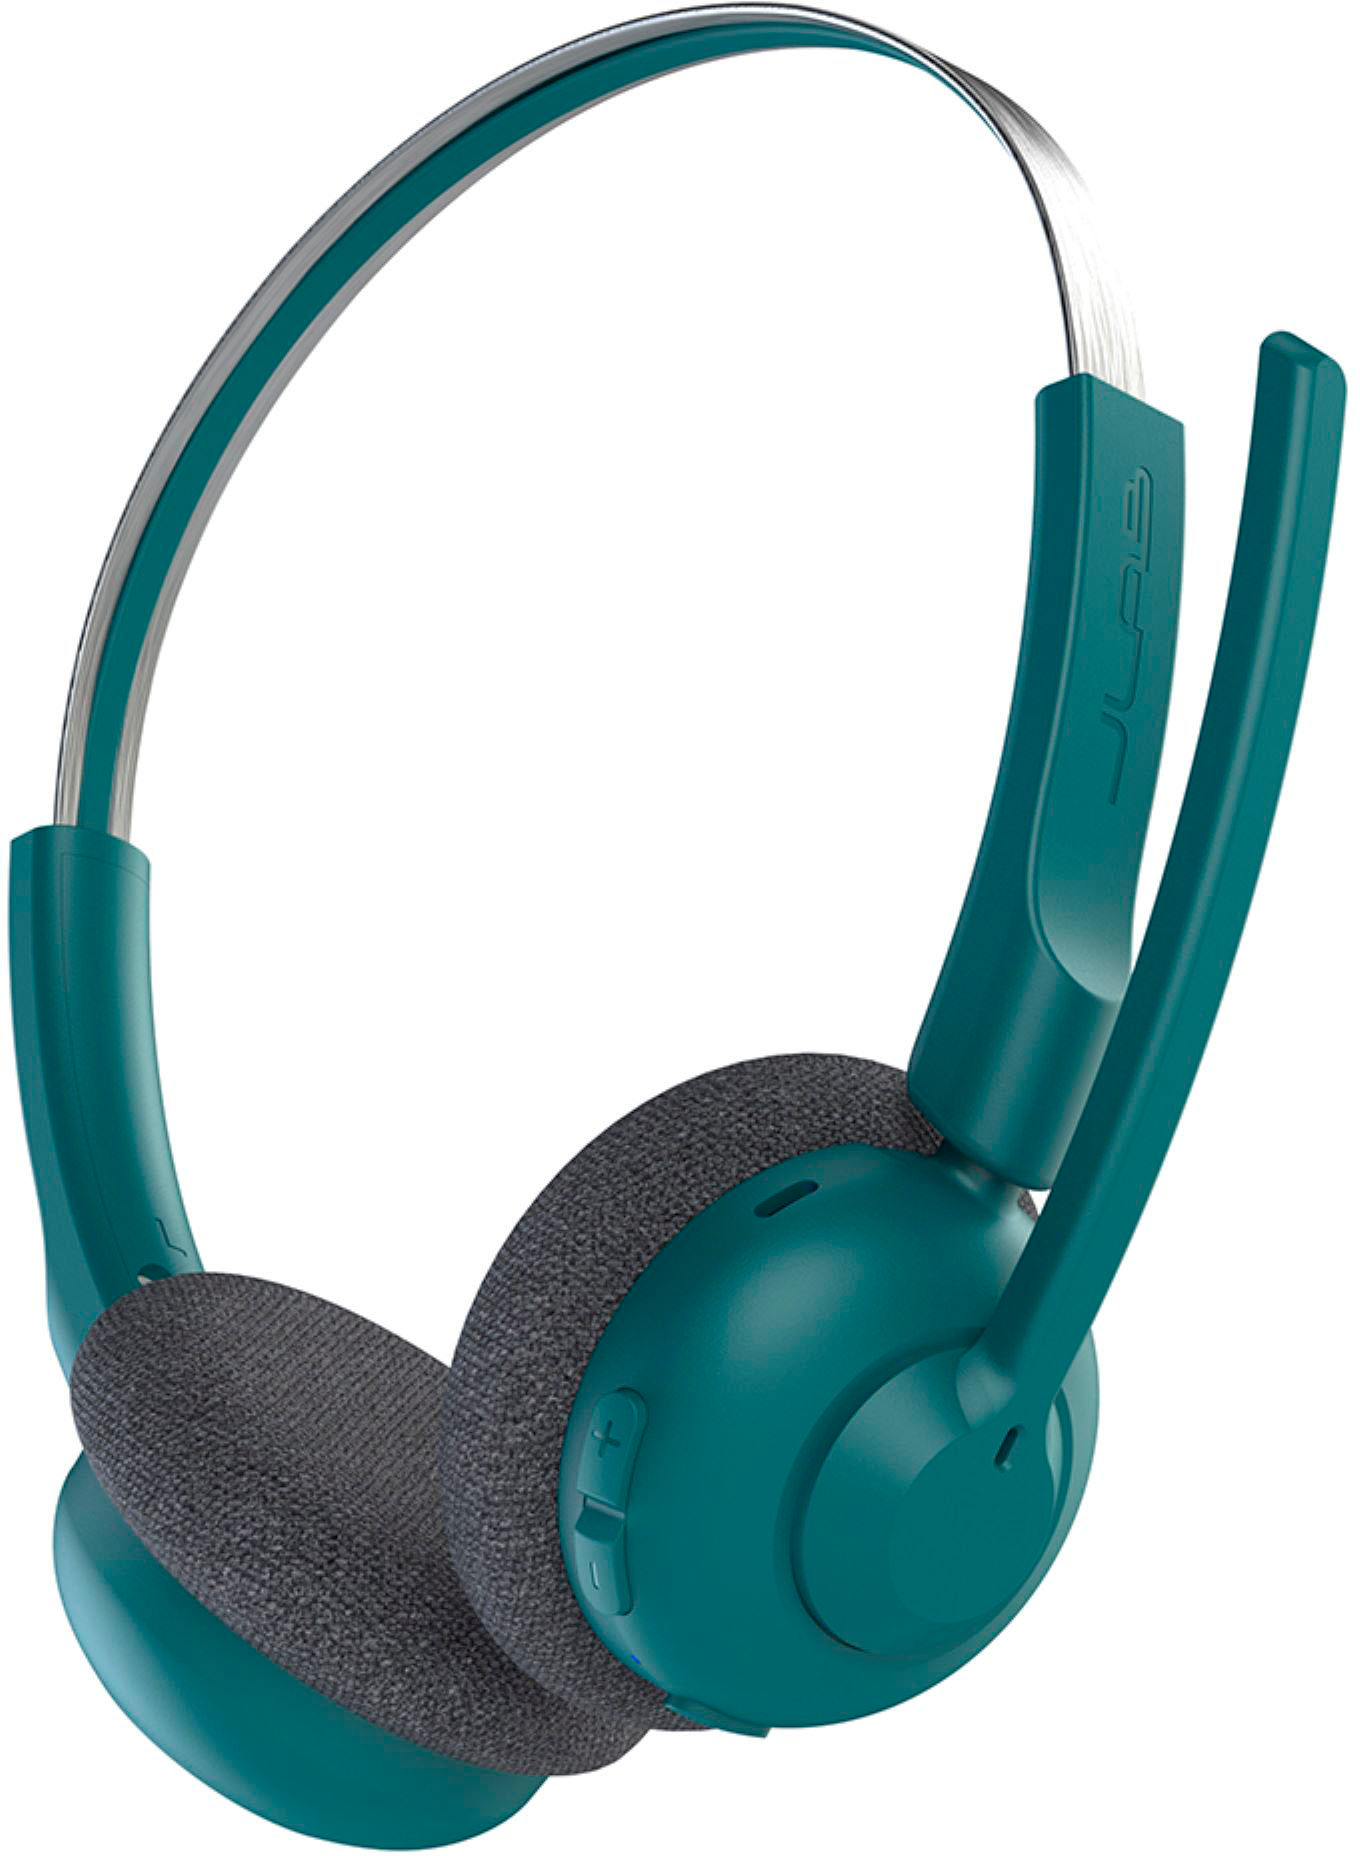 Angle View: Logitech - Zone 300 Wireless Bluetooth On-ear Headset With Noise-Canceling Microphone - Black